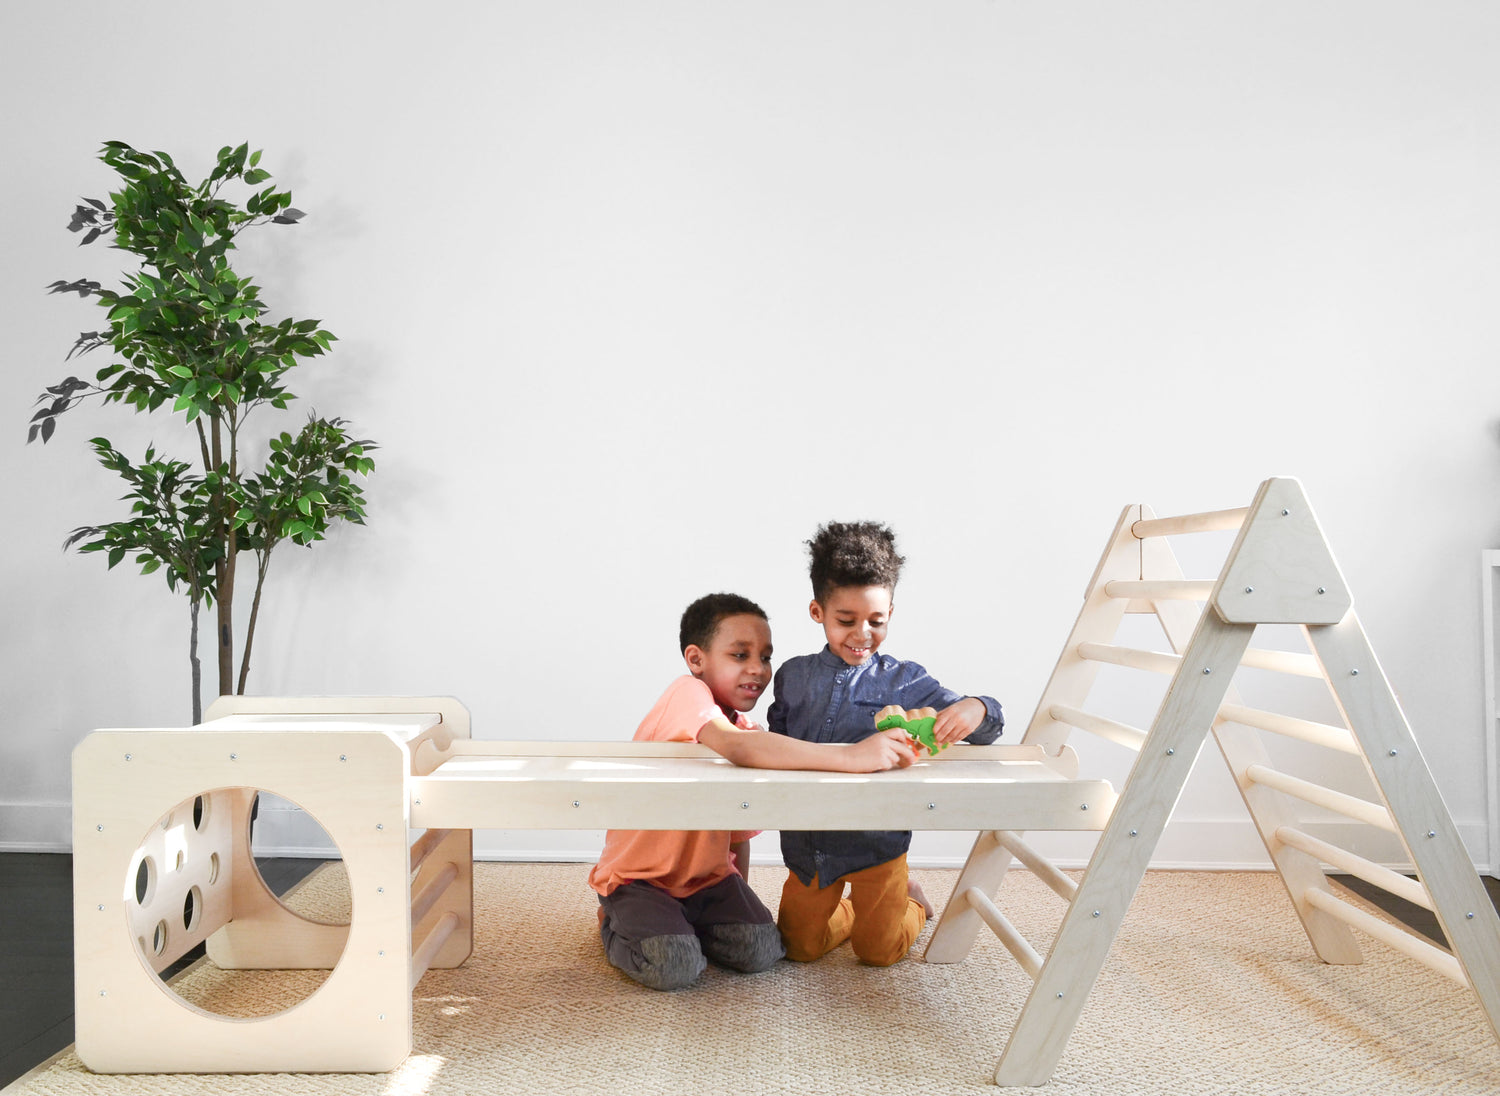 Combine The Wooden Studio’s Cube, Triangle, and 2-in-1 Ramp to create a modern maze of fun and adventure. Individually, each of the three masterly crafted pieces have been designed to develop your child’s physical and intellectual abilities.